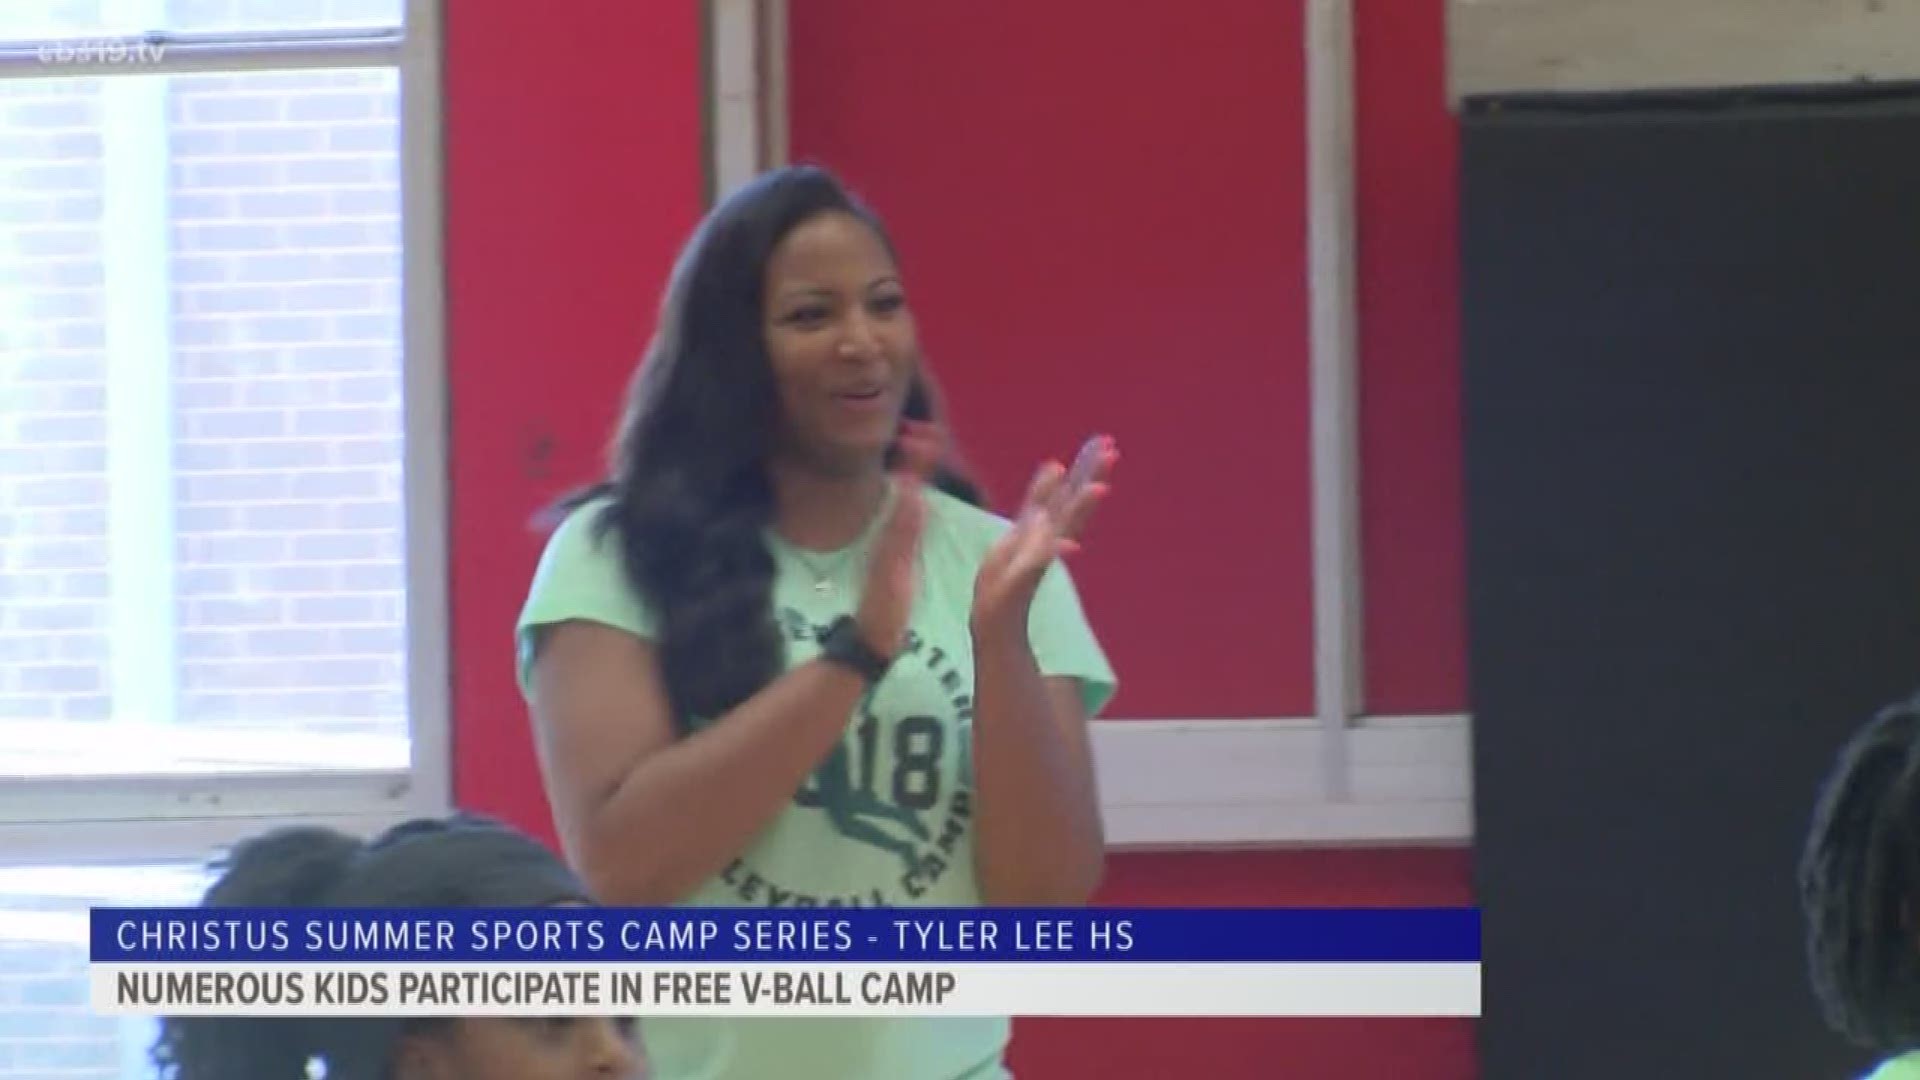 Free Volleyball camp held at Tyler Lee